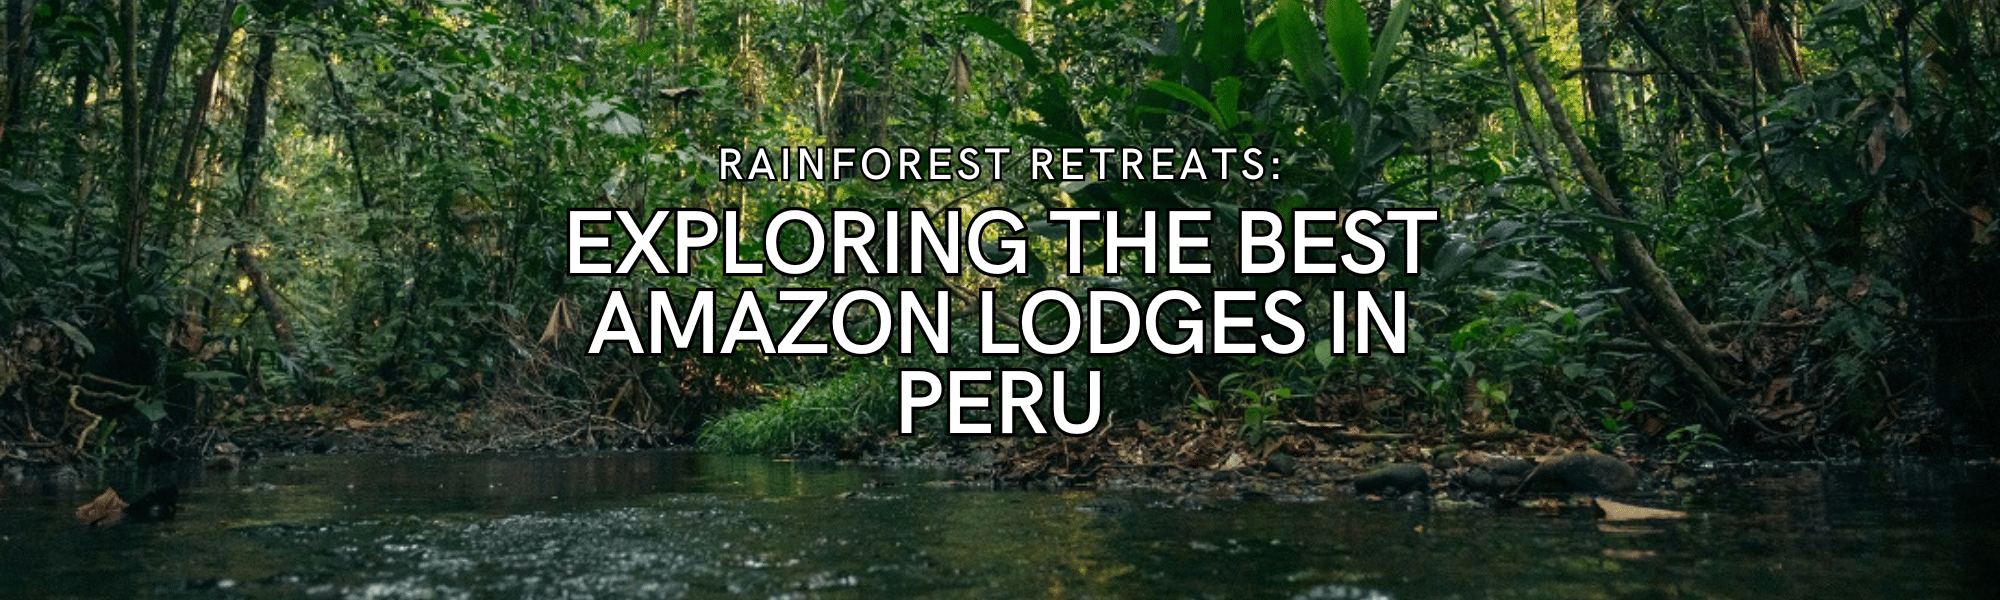 Exploring the Best Amazon Lodges in Peru